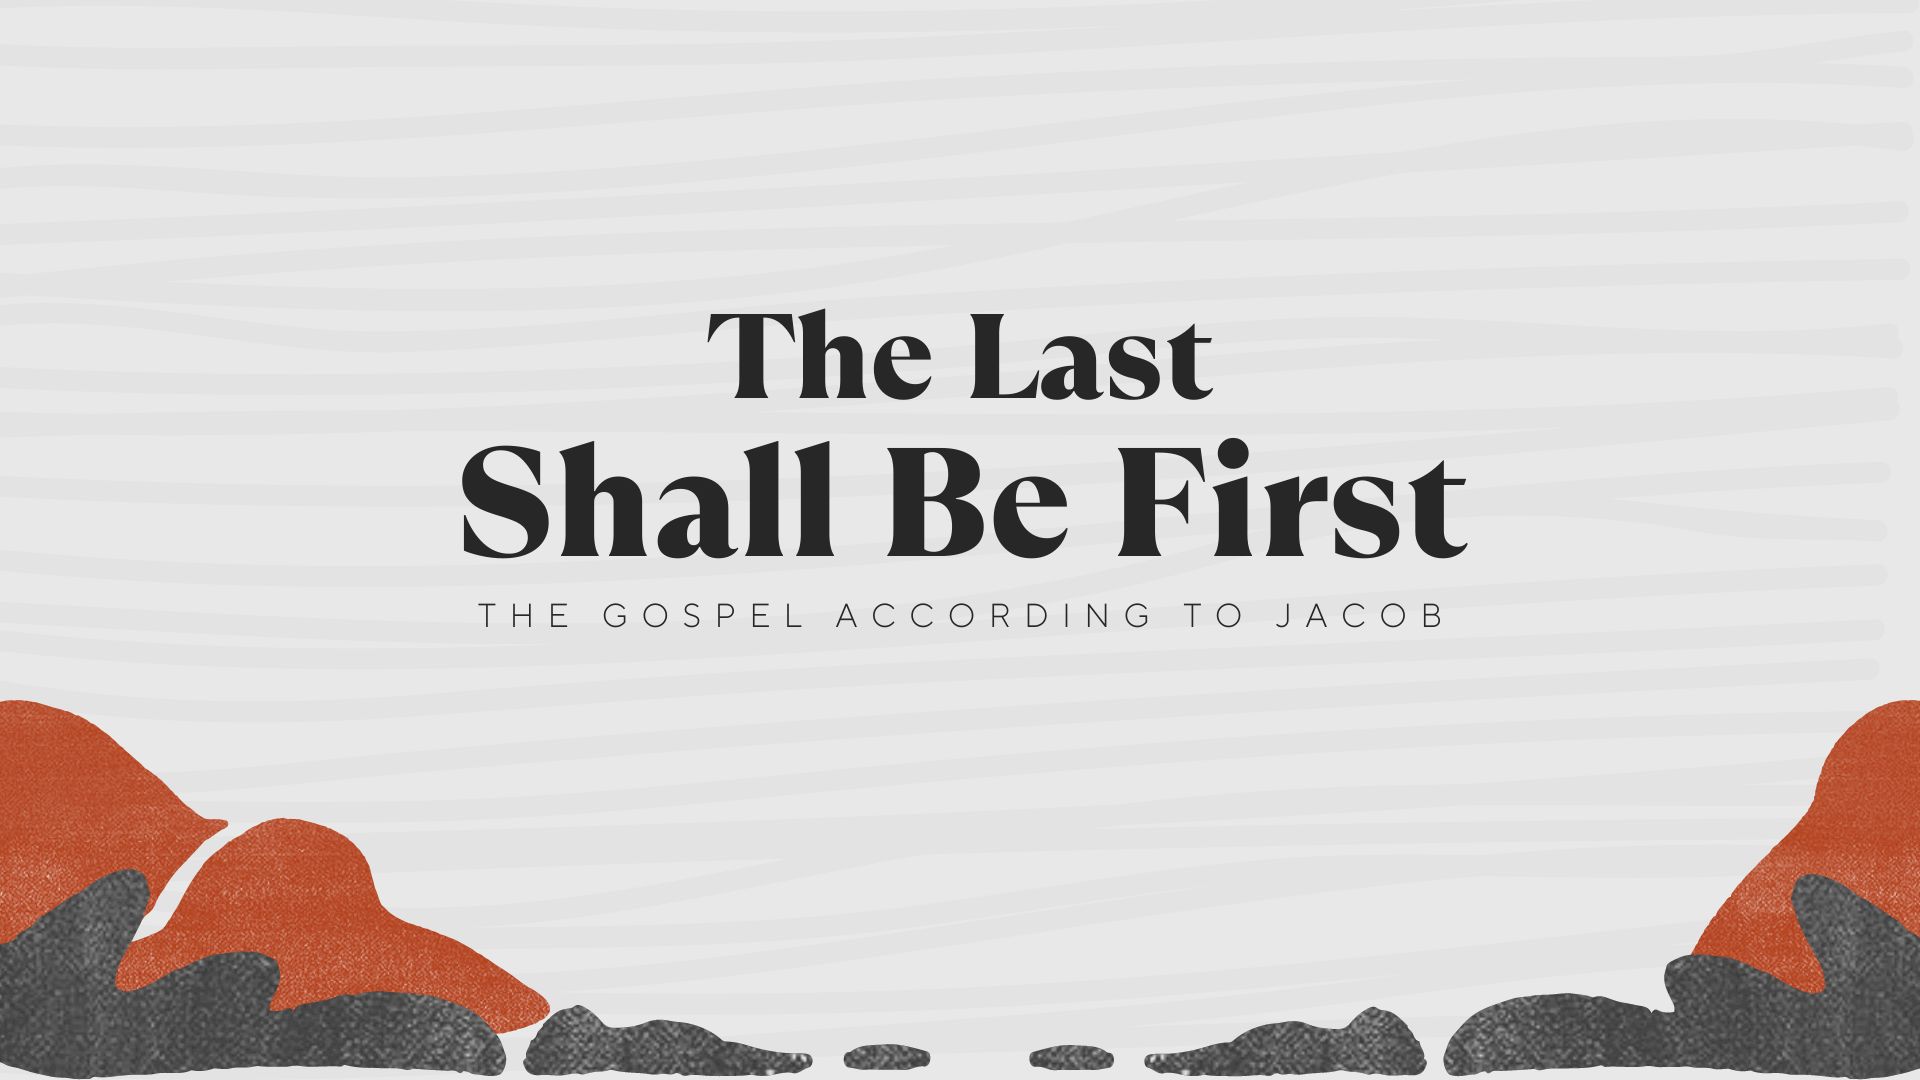 The Last Shall Be First: Reconciliation